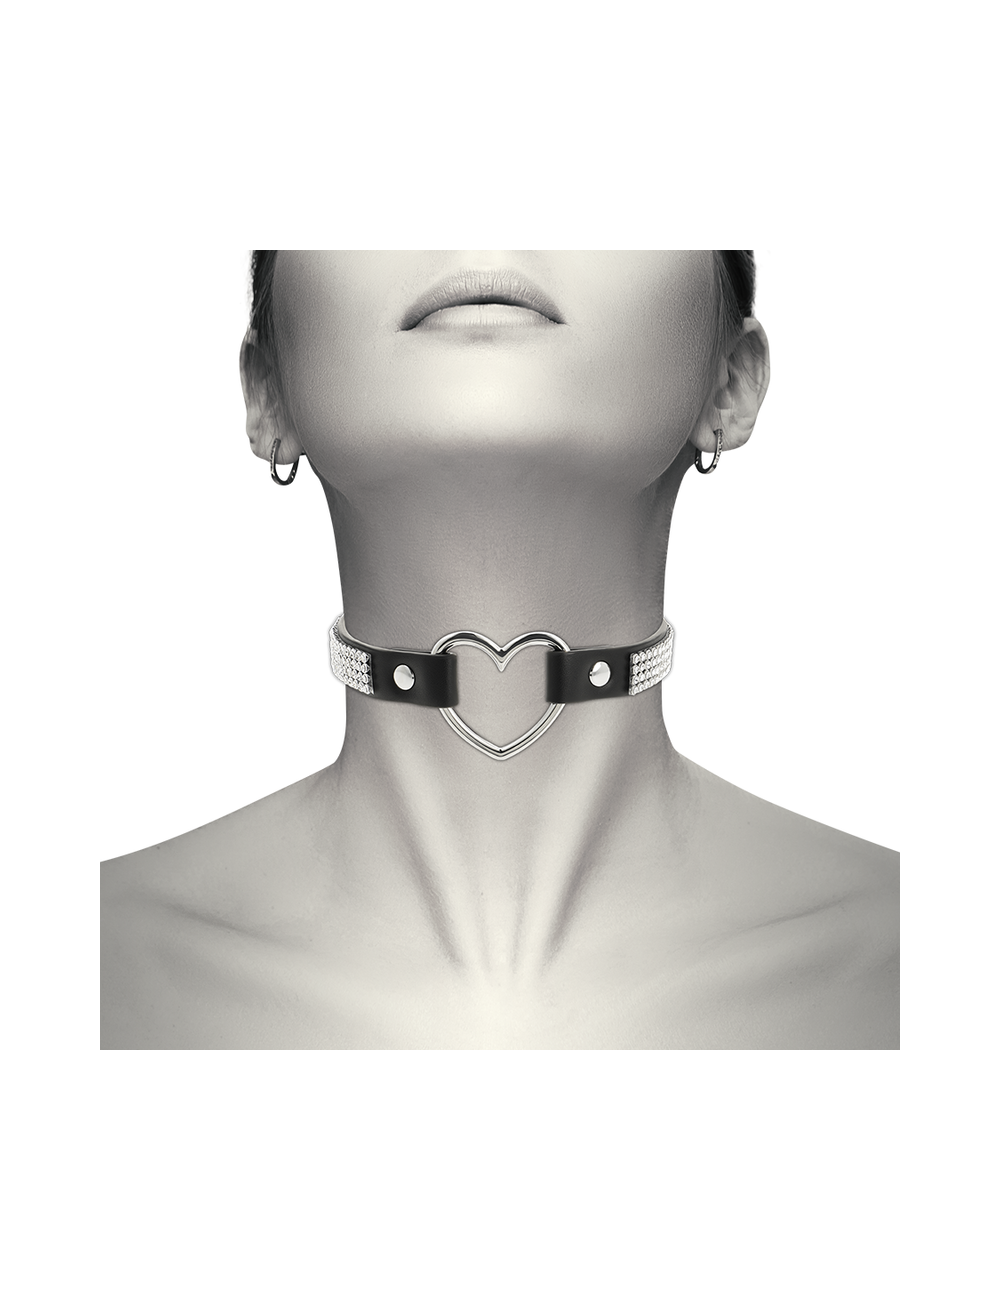 Sextoys - Bondage - SM - COQUETTE HAND CRAFTED CHOKER VEGAN LEATHER - HEART - Coquette Accessories